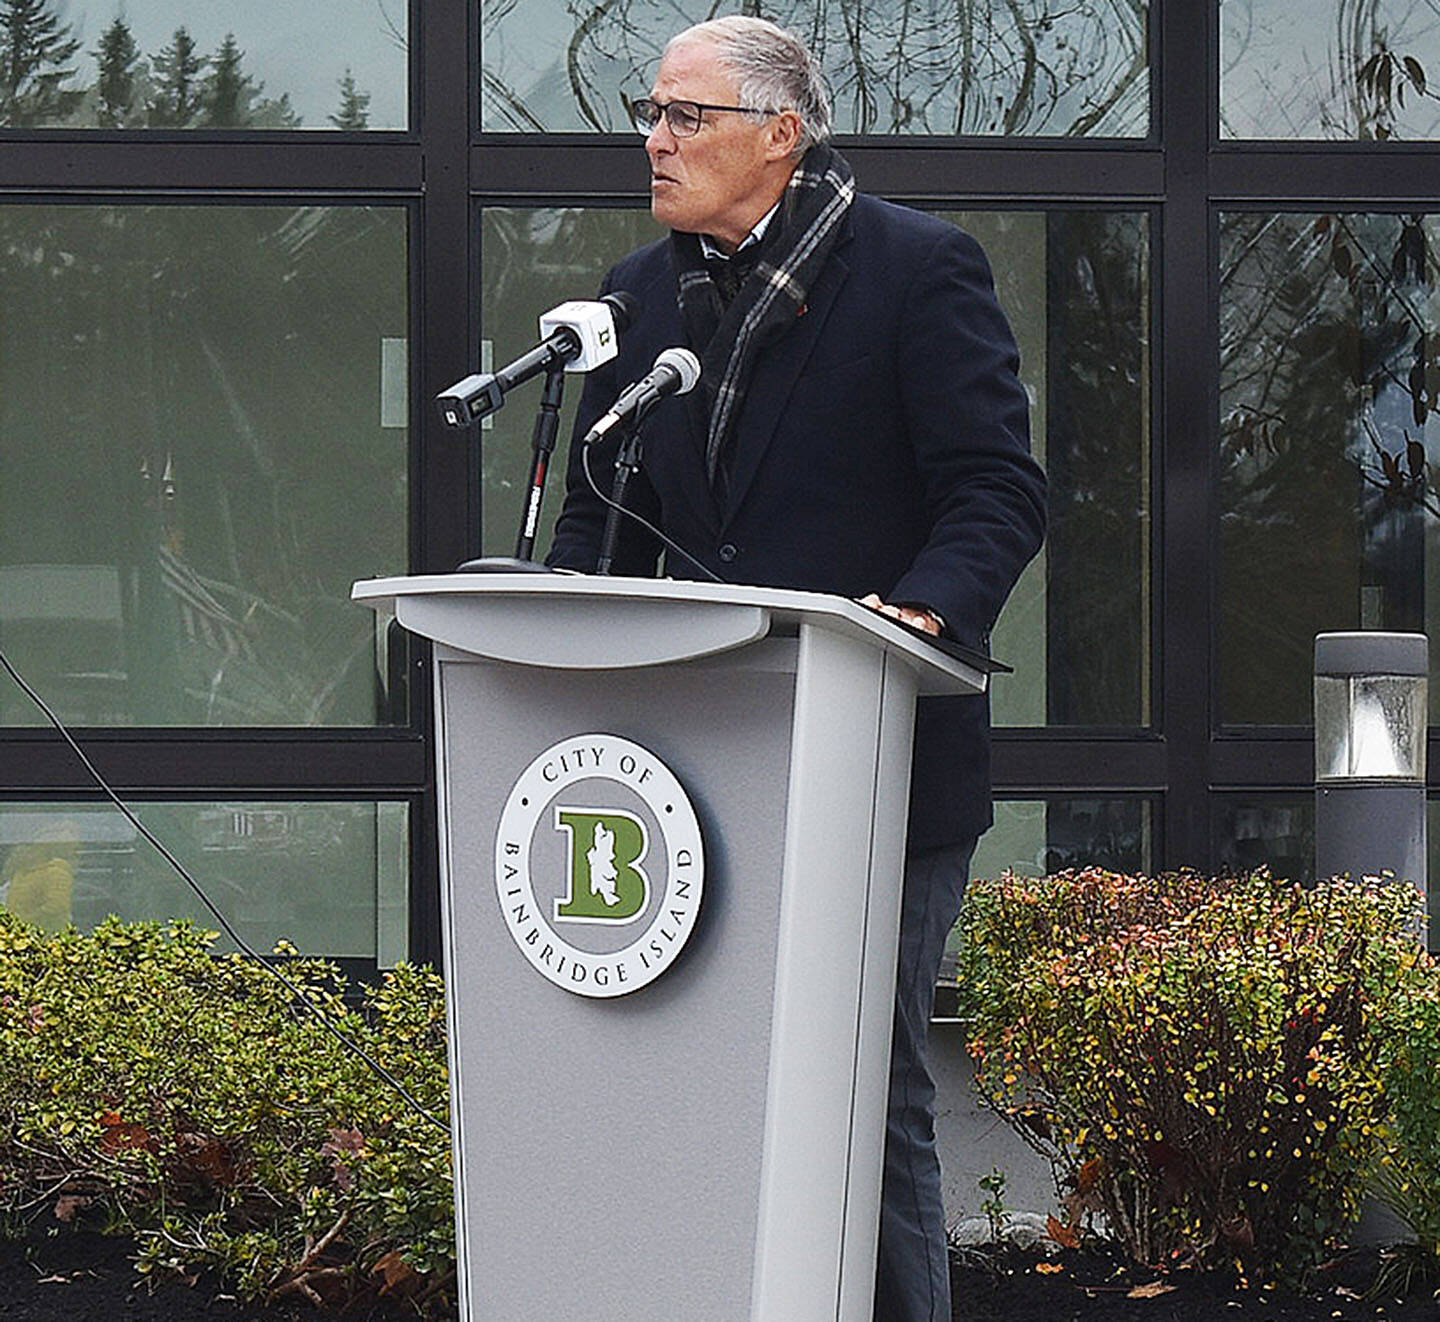 Governor Jay Inslee is excited about the Ted Spearman Justice Center.